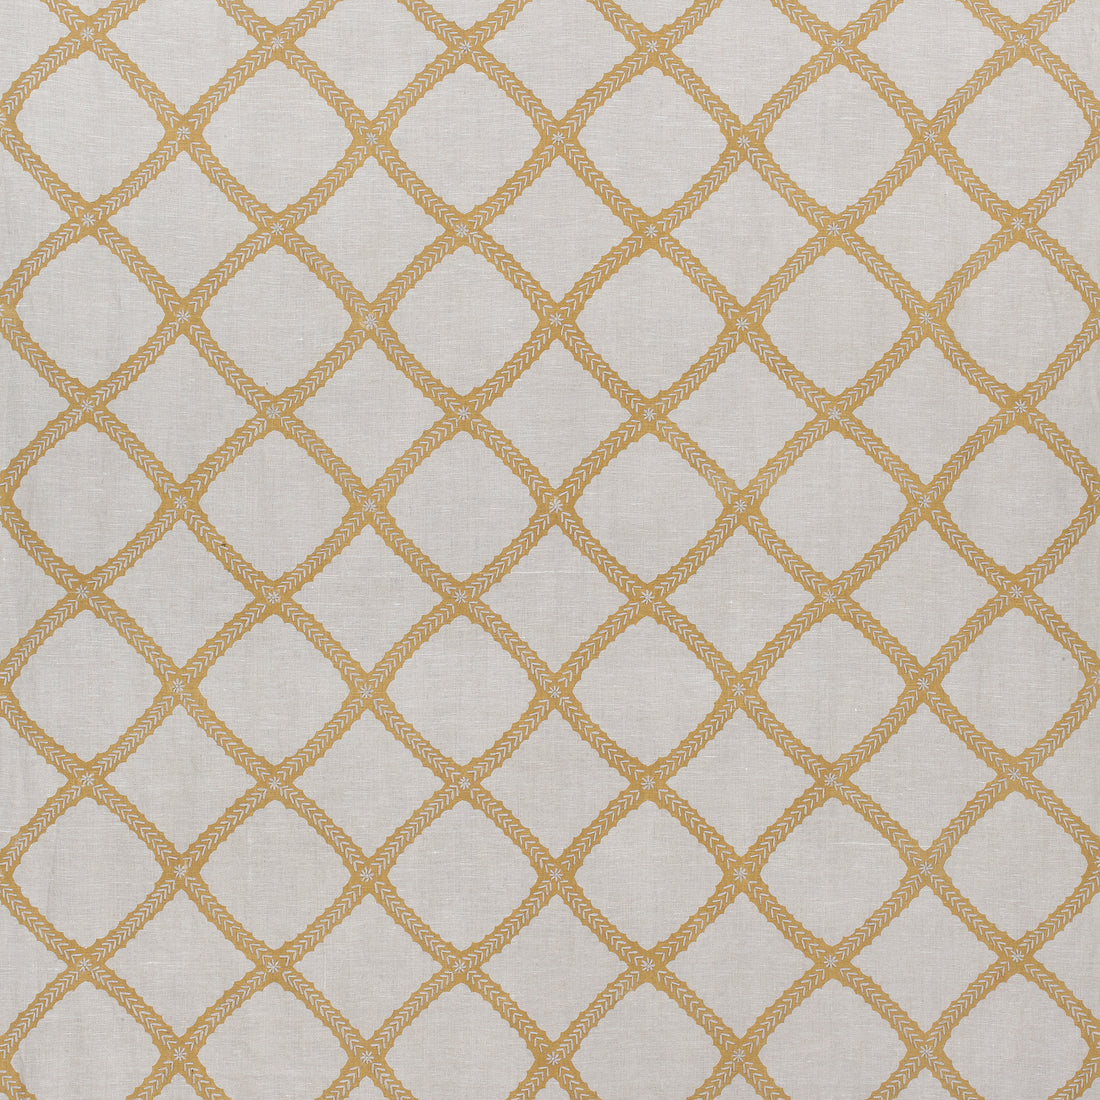 Majuli Embroidery fabric in gold on flax color - pattern number W788708 - by Thibaut in the Trade Routes collection